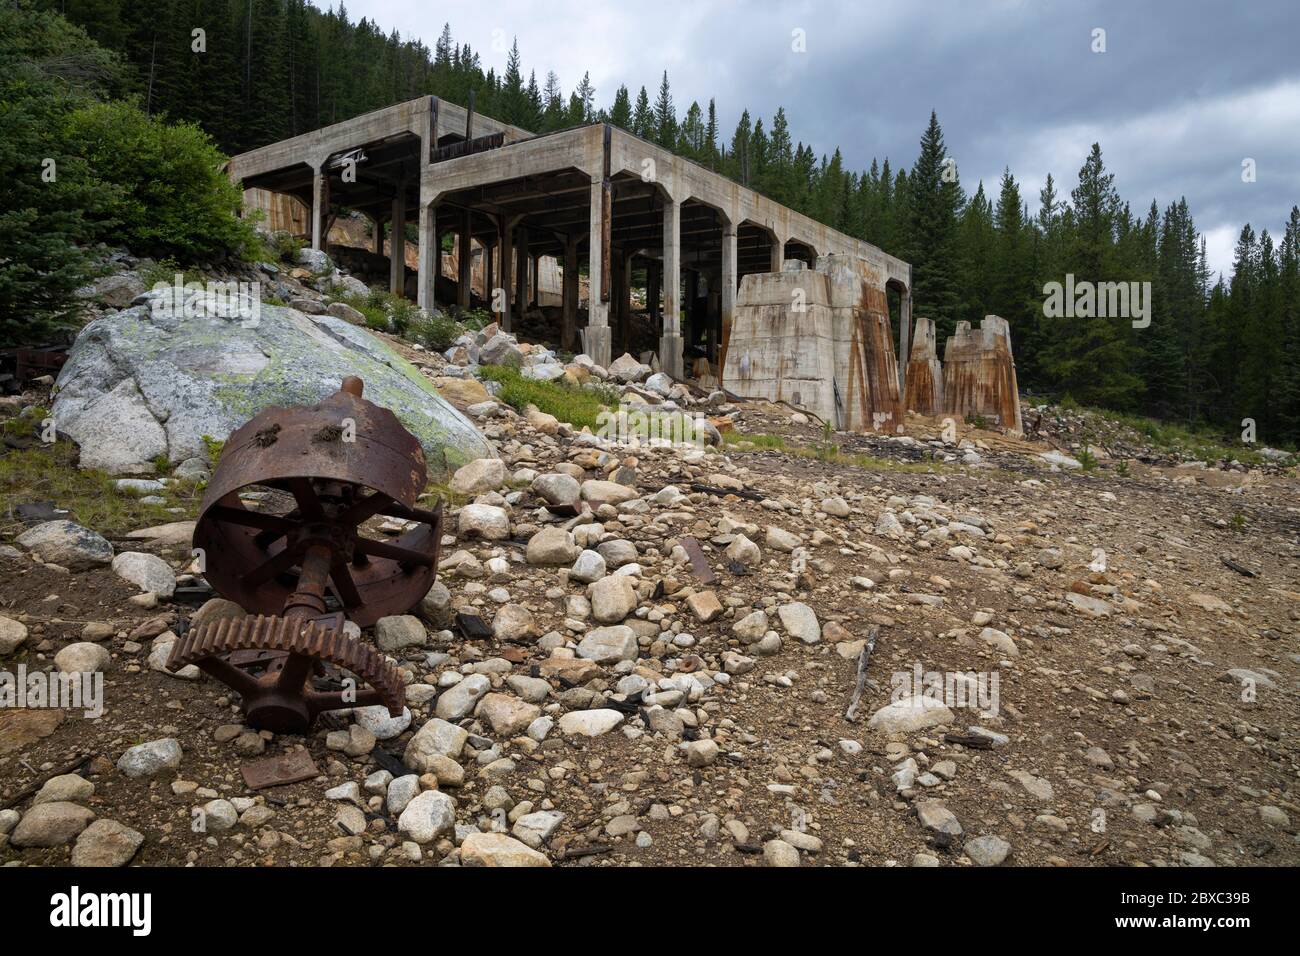 Only foundations and scattered pieces of machinery remain of Elkhorn mill, once the largest mill in Montana, located near the ghost town of Coolidge. Stock Photo